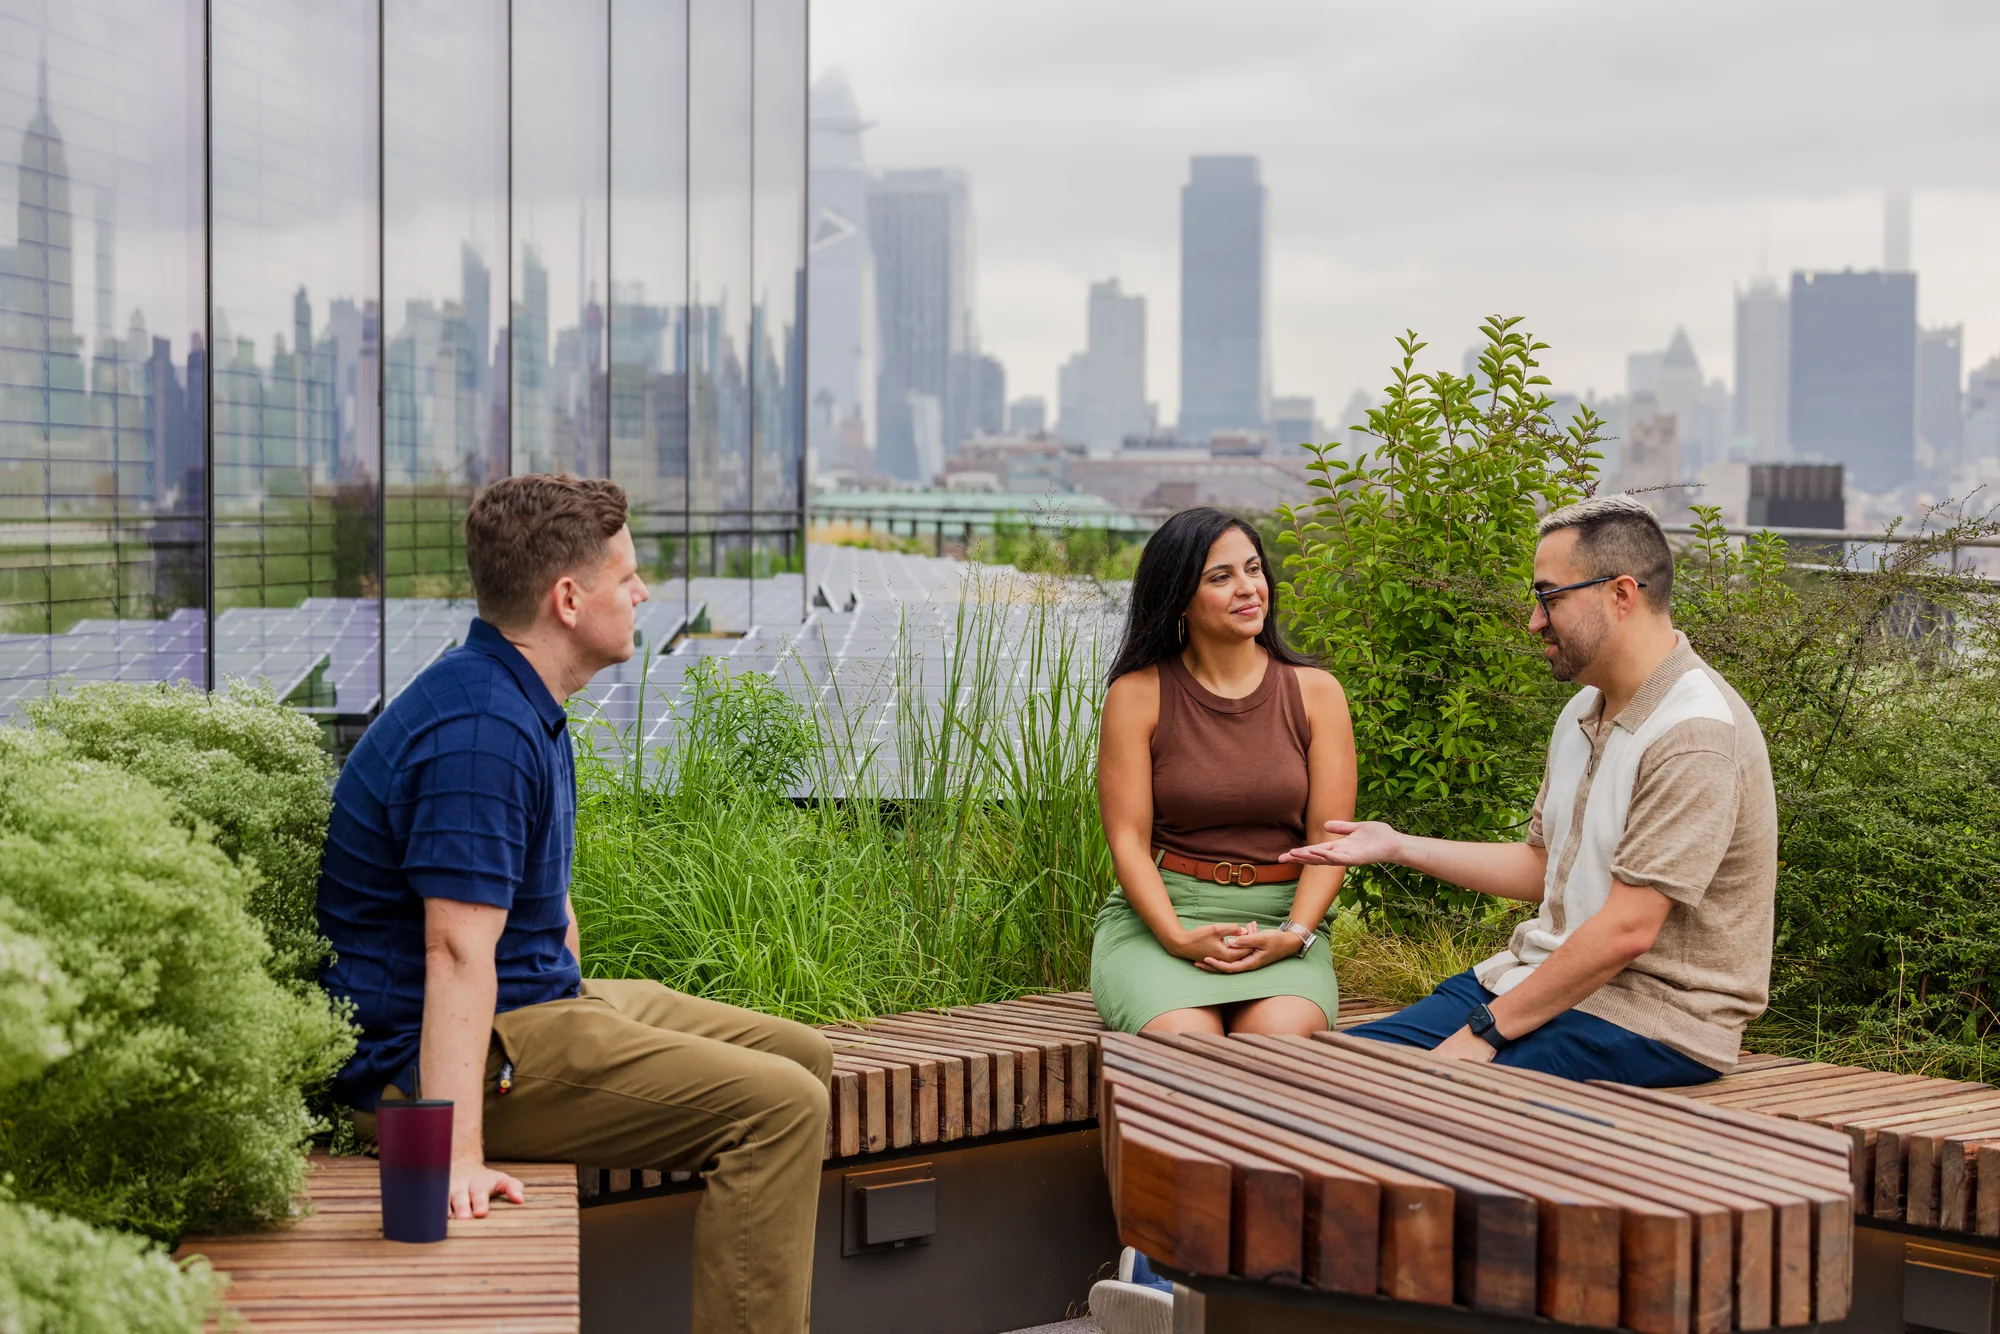 Three Googlers sit outdoors on wood benches, with greenery and solar panels in the background.